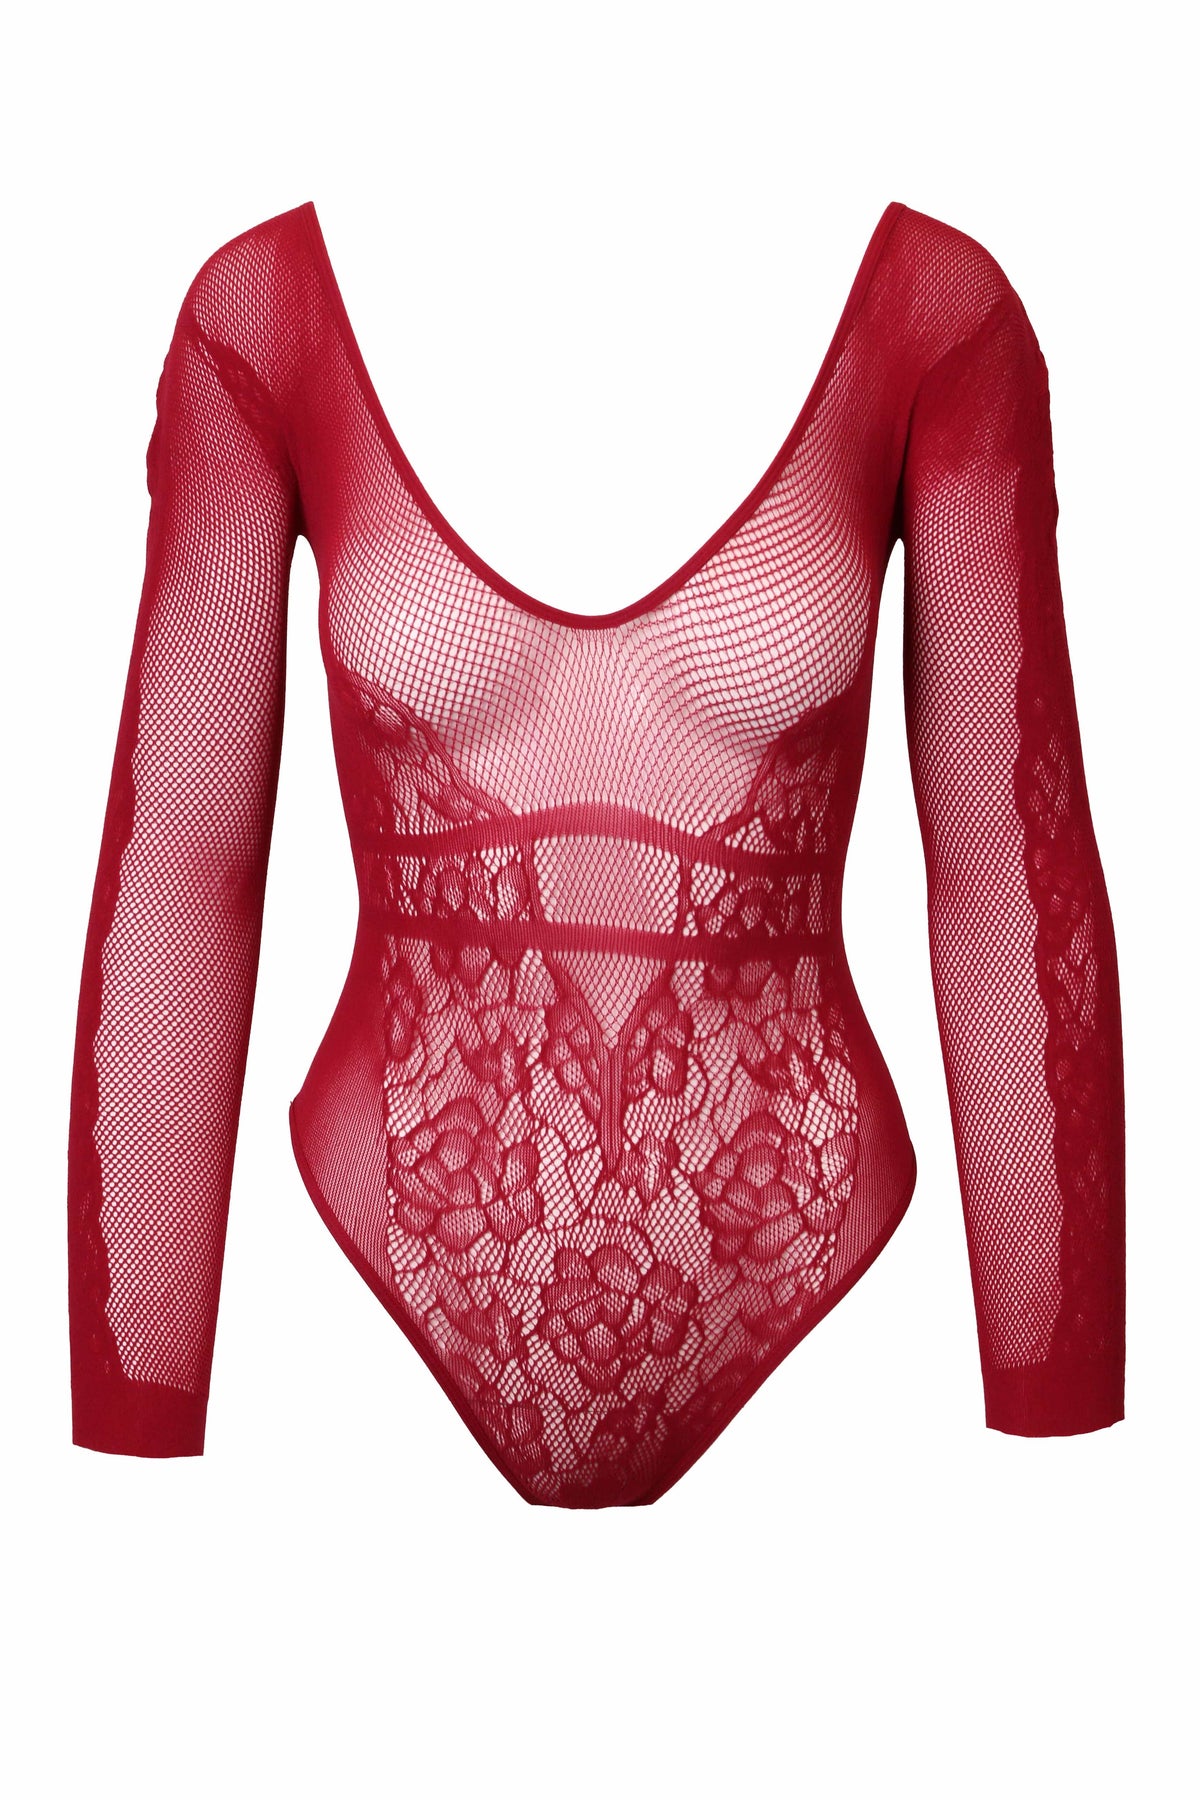 Hauty Teddy Red / One Size Mas Vino Teddy - Red